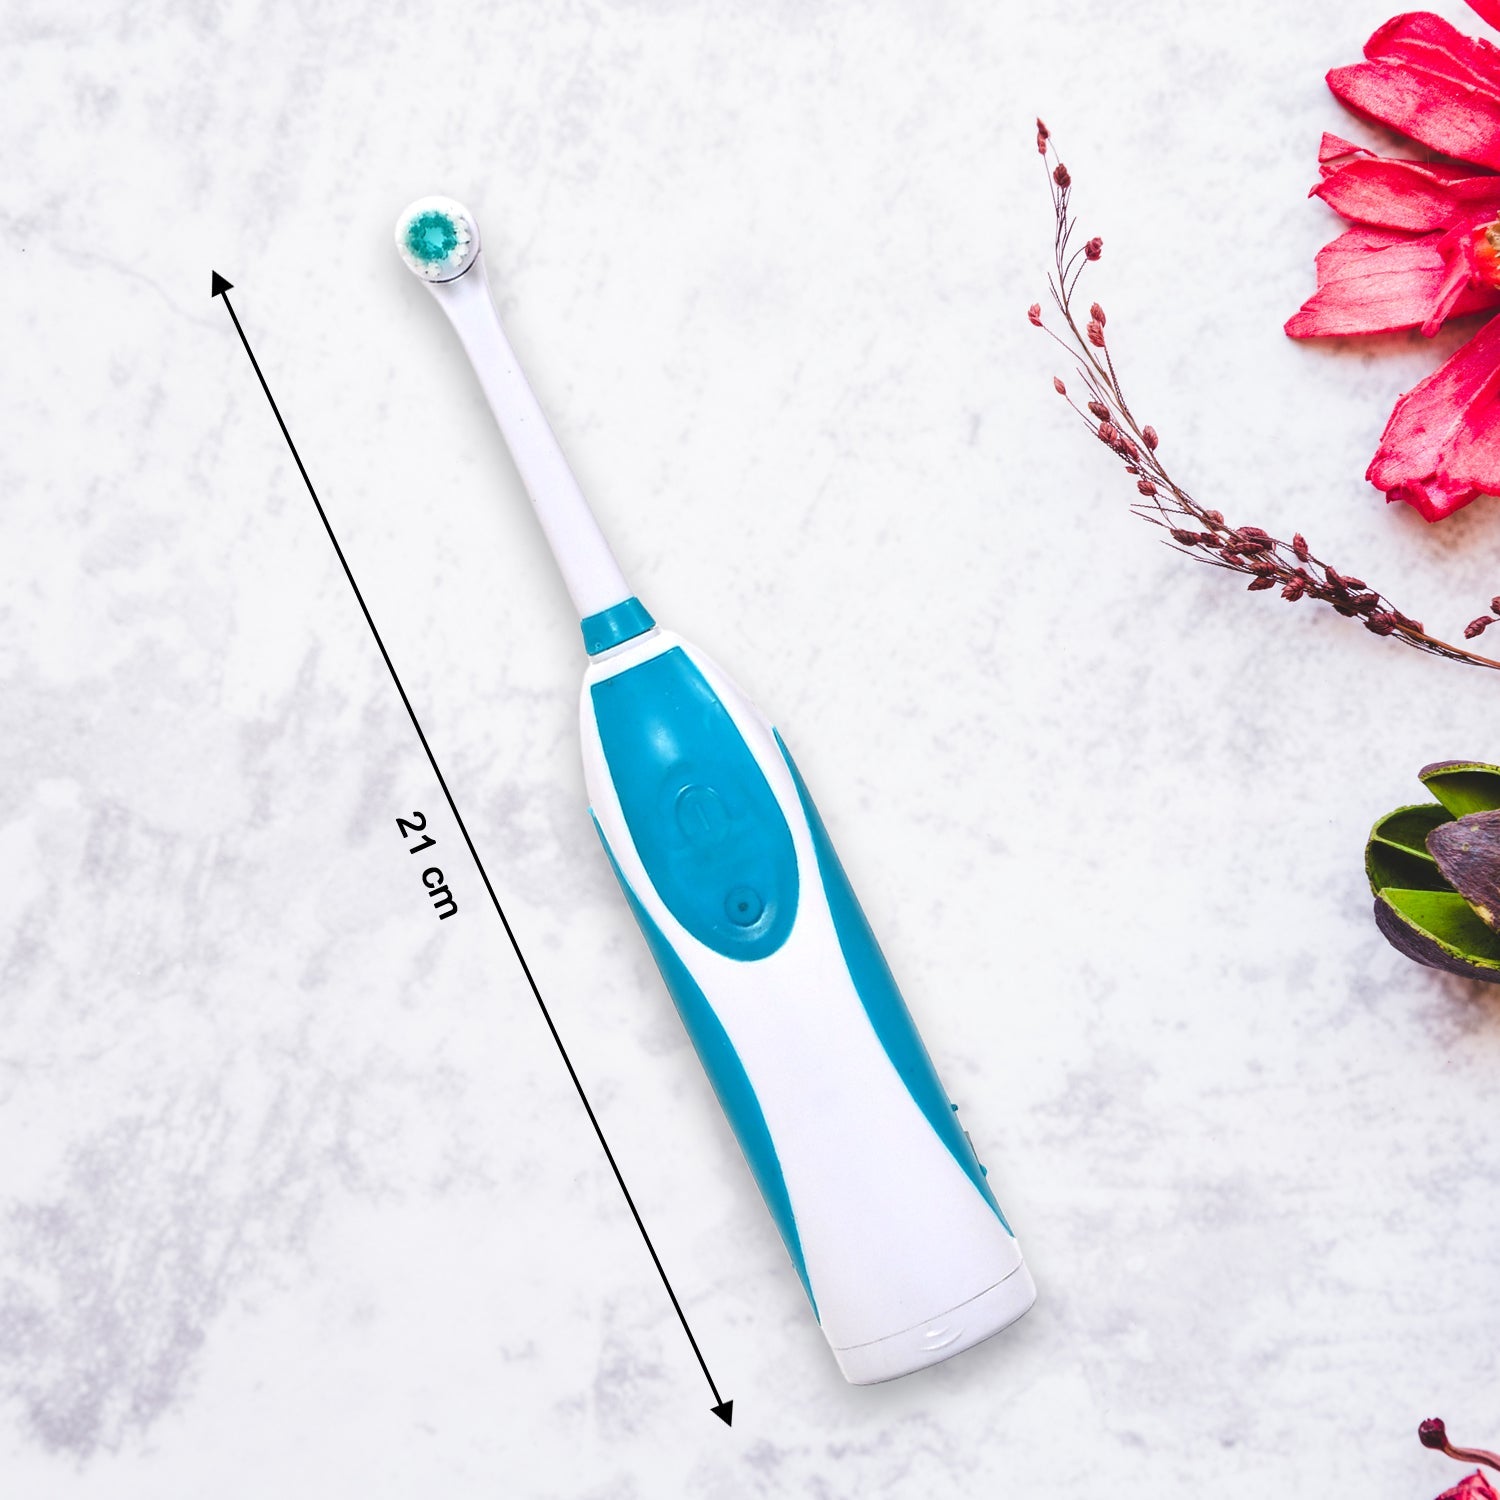 6209 Electric Toothbrush for Adults and Teens, Electric Toothbrush Battery Operated Deep Cleansing Toothbrush. 